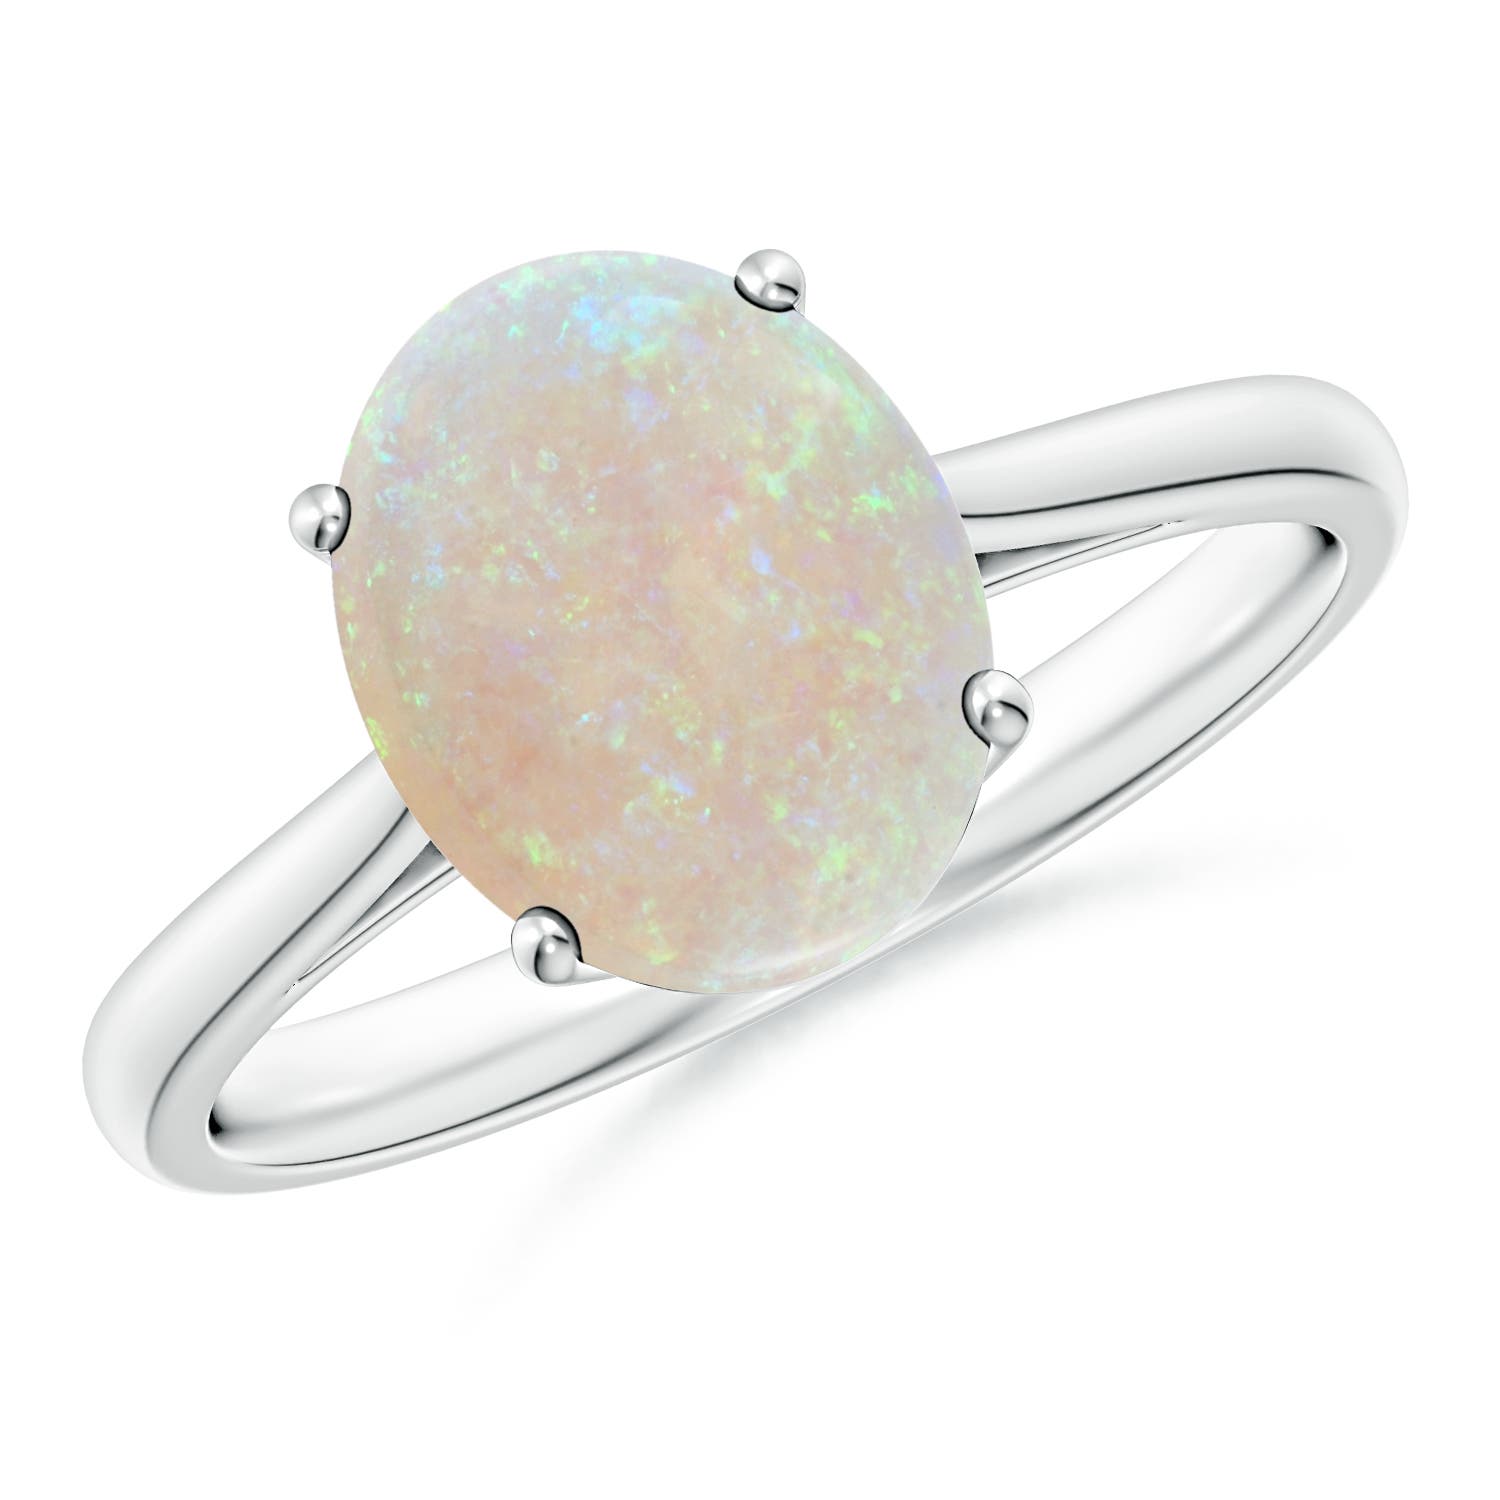 AA - Opal / 1.45 CT / 14 KT White Gold